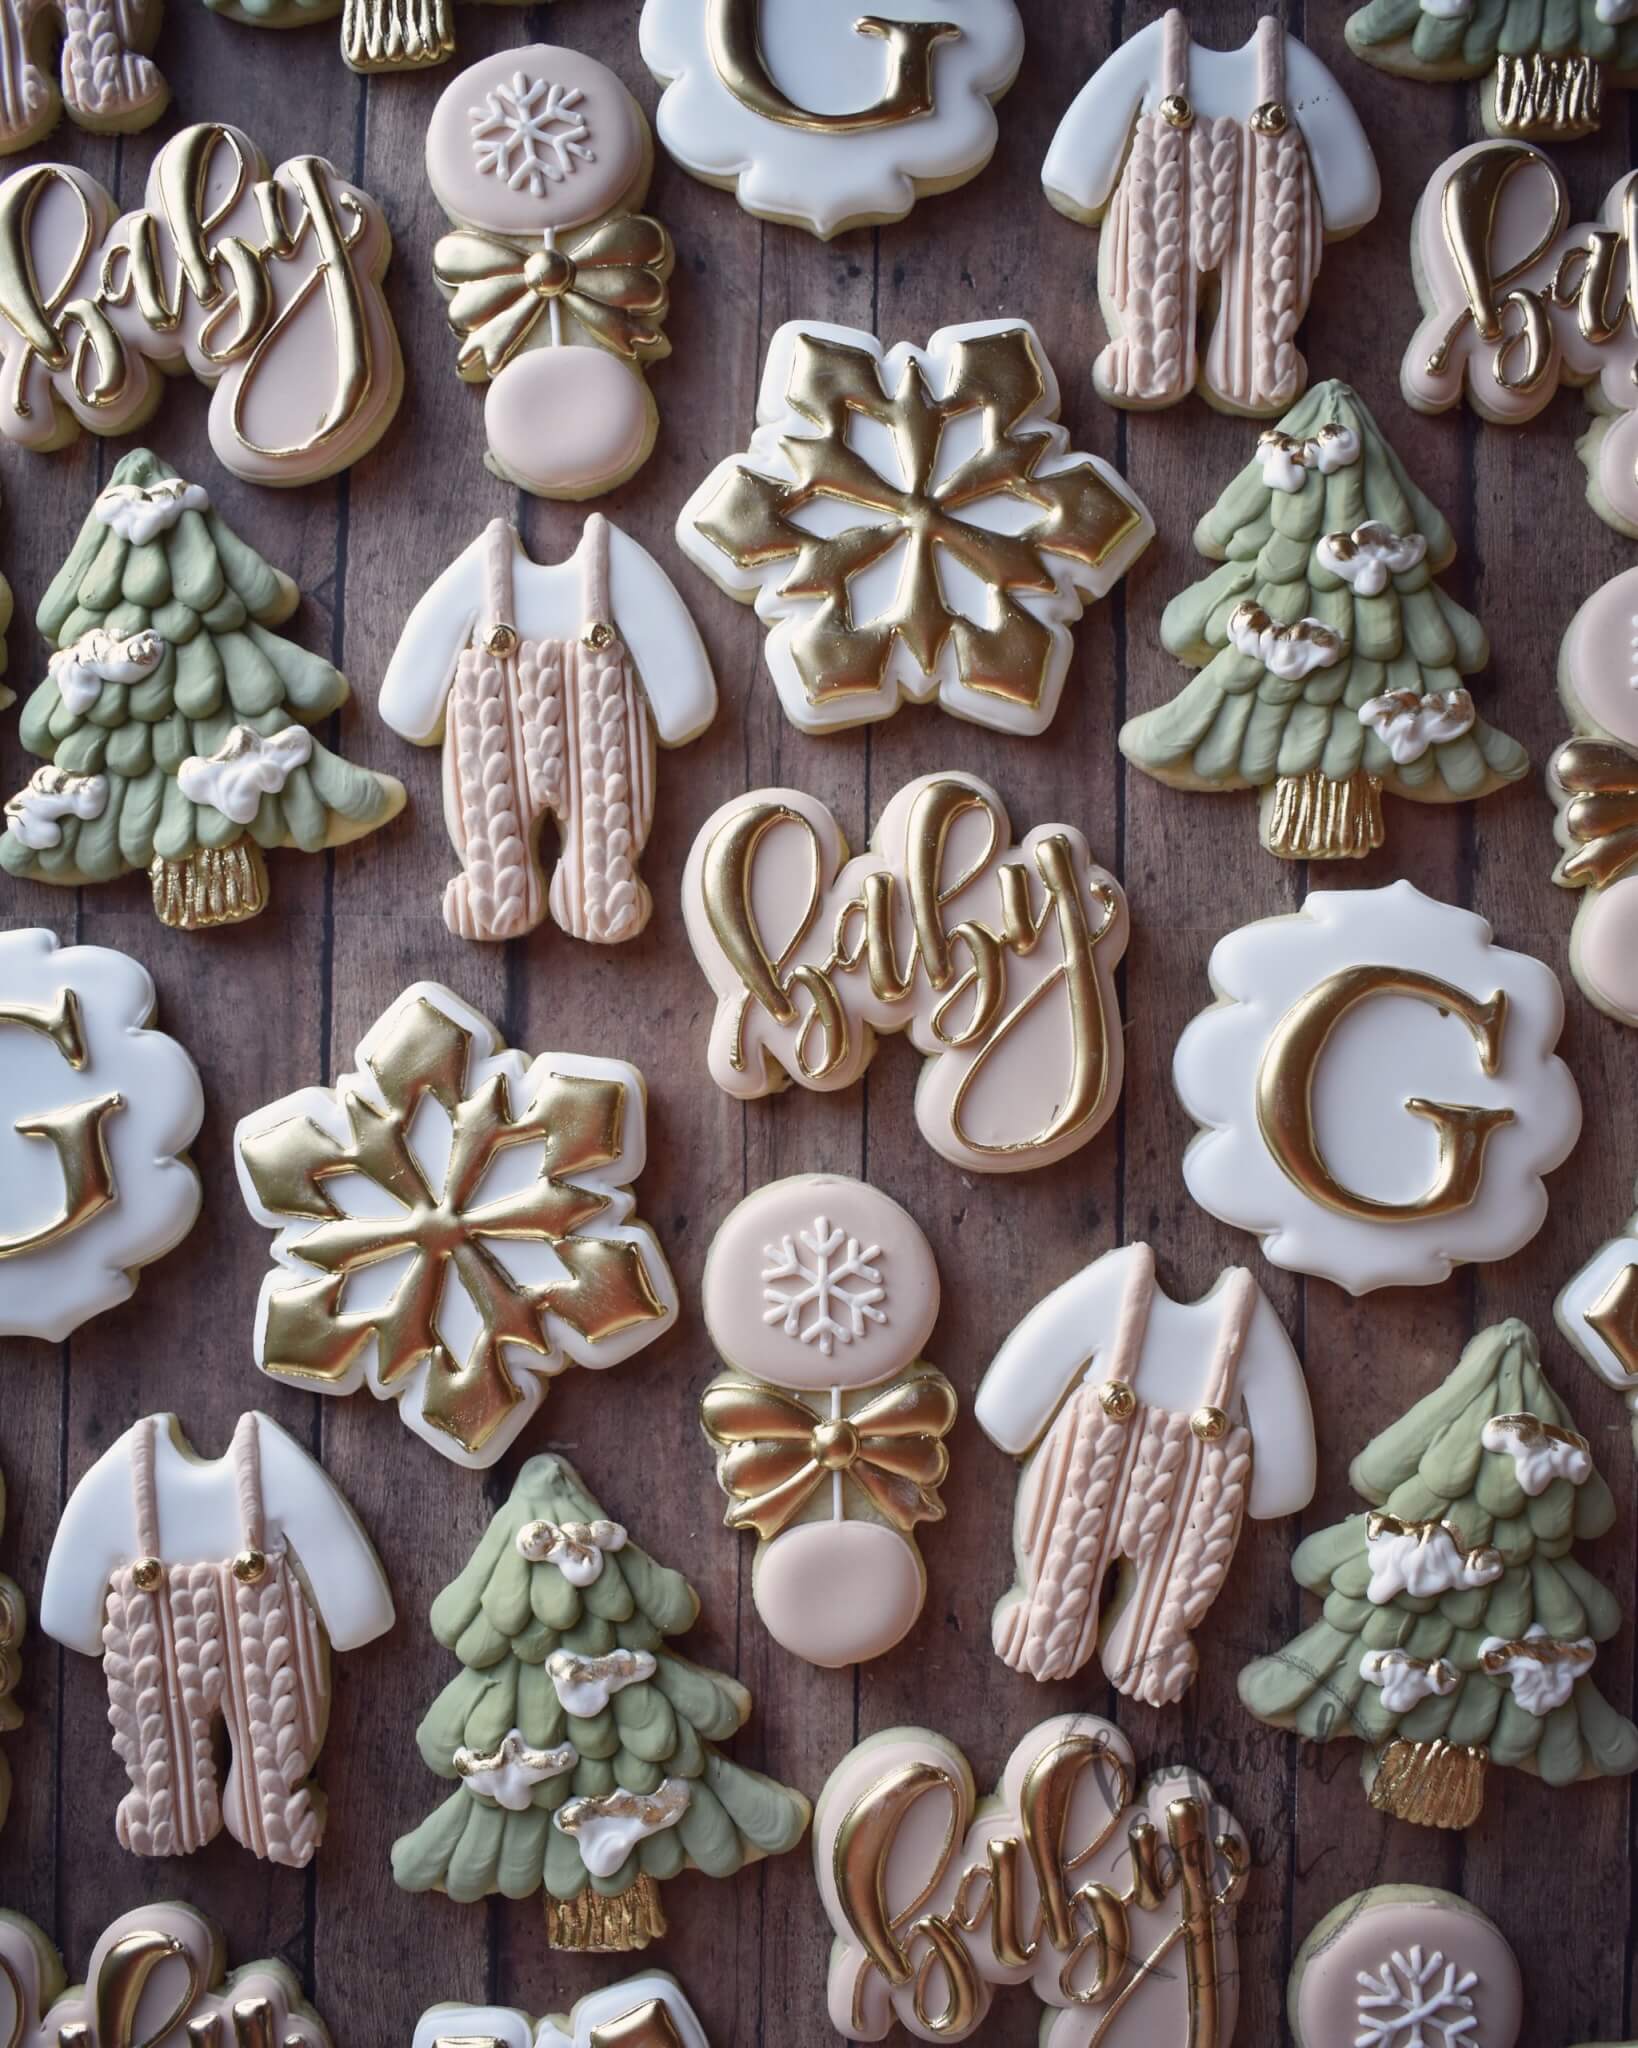 As the Backroad Baker, Luse creates custom cookies for any customer or occasion.